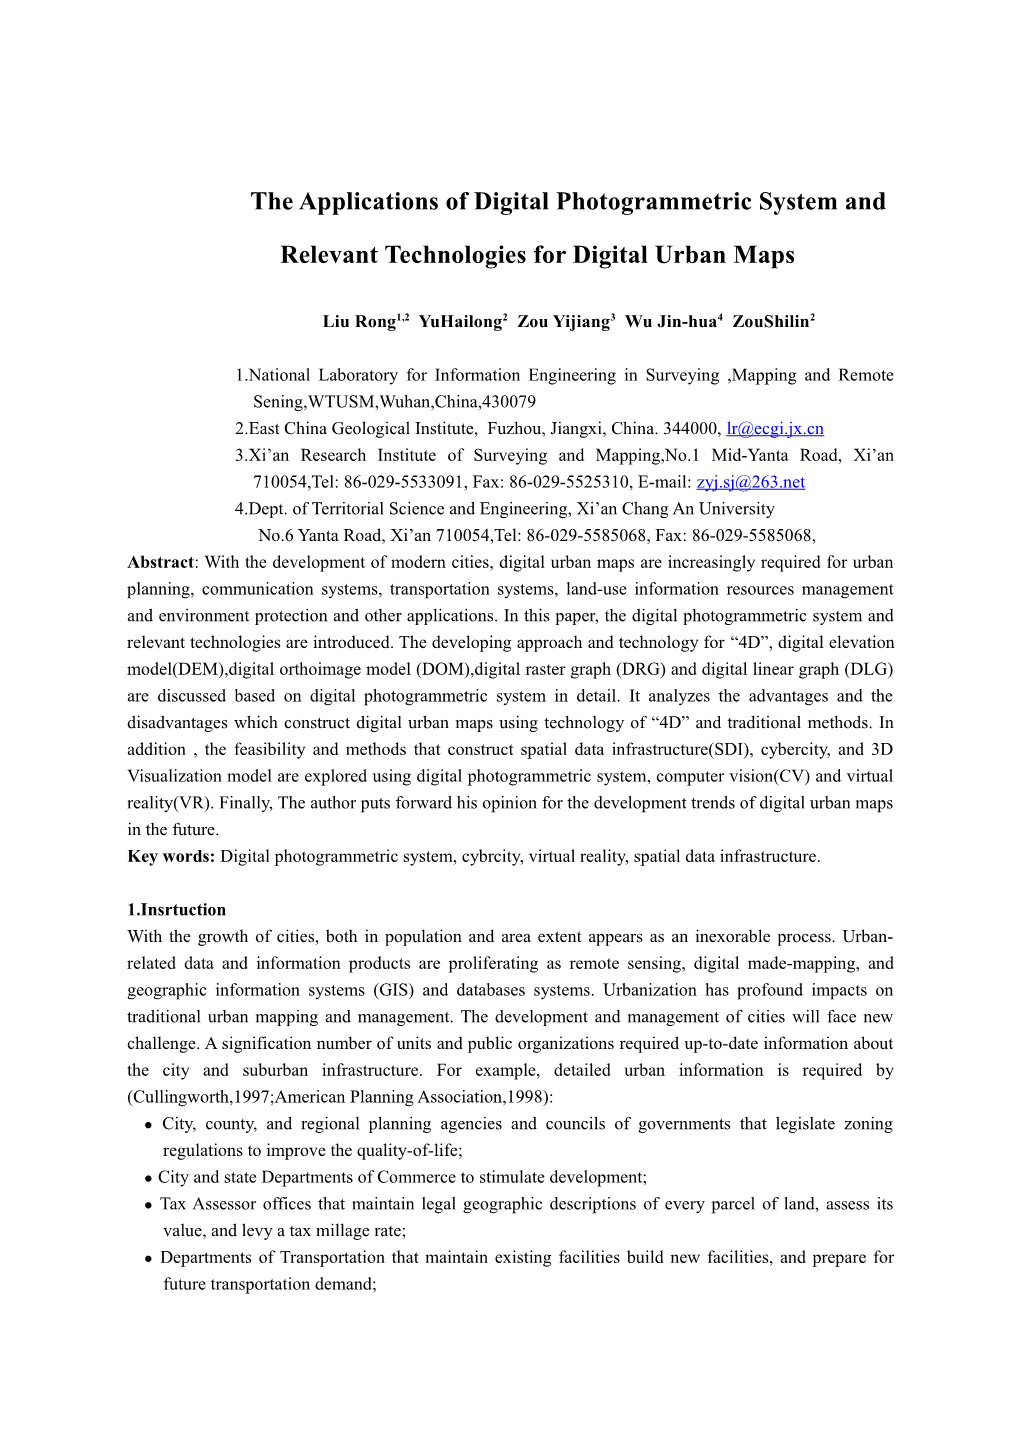 The Applications of Digital Photogrammetry System and Relevant Technologies for Digital City Map